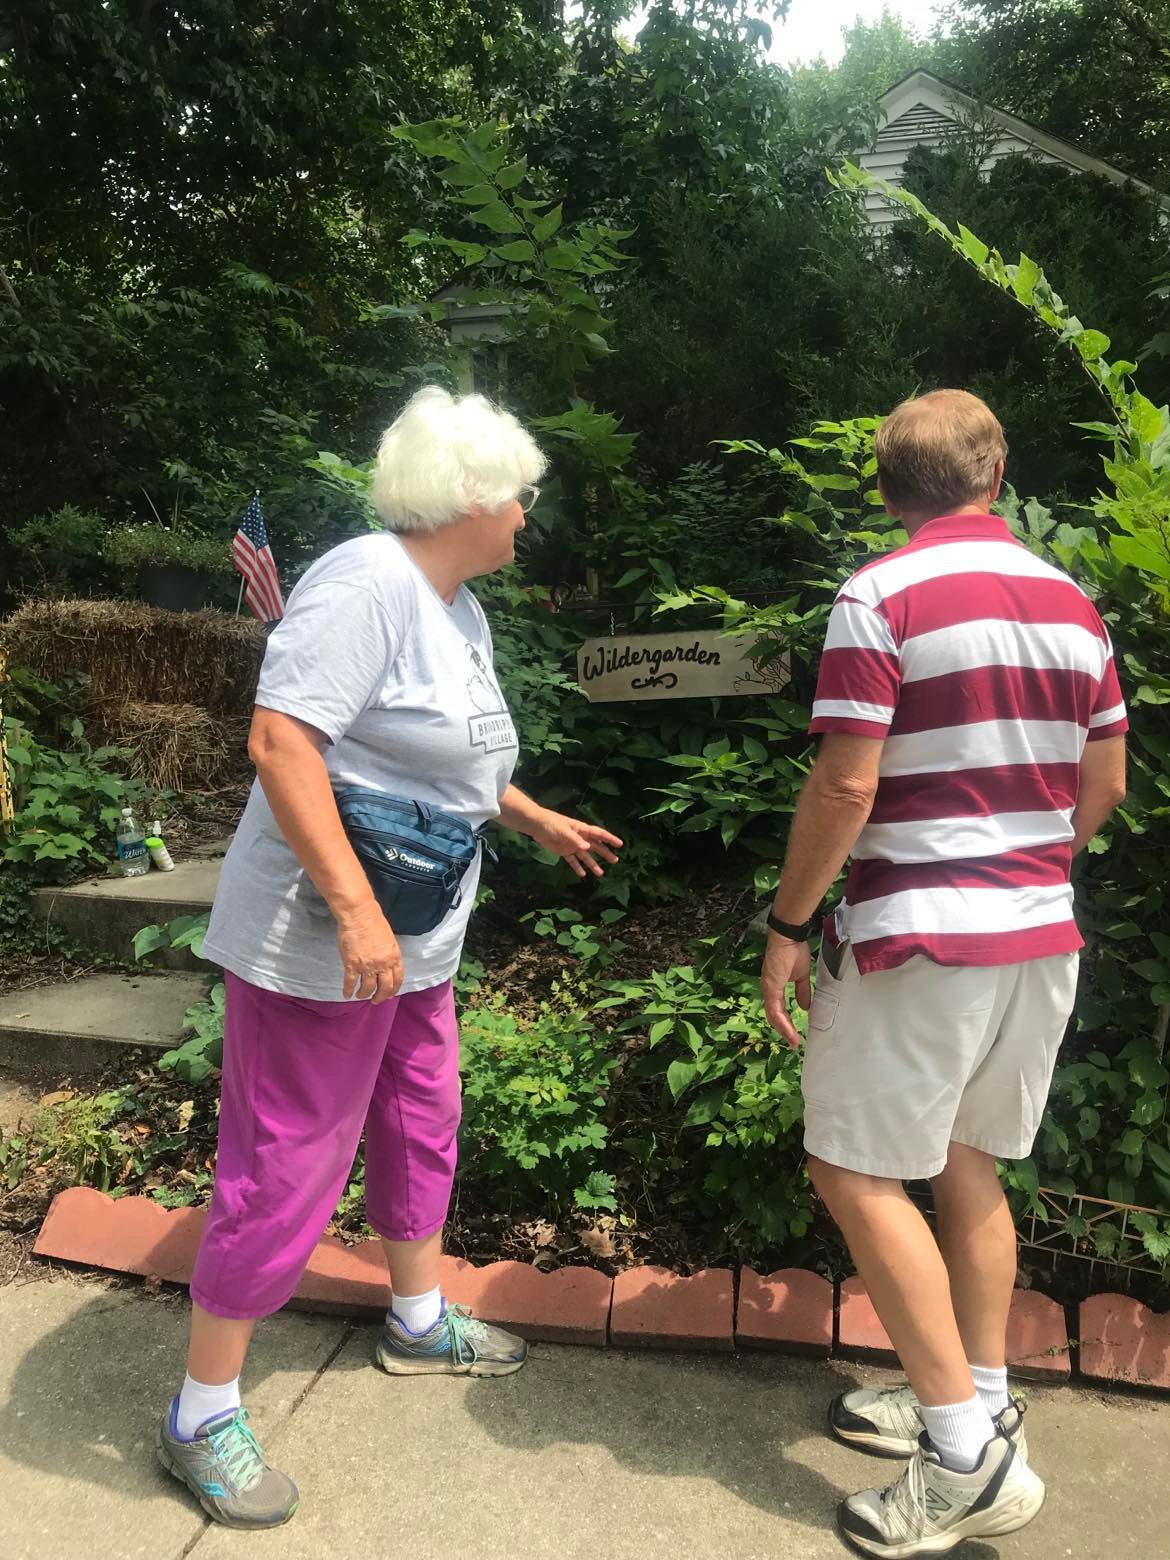 Building Community! Julia, a vigorous, gray-haired woman wearing a lavender shirt, pink pants, and a blue bag speaks to her friend Rex, a man in a red and white striped shirt and white shorts, while standing in front of the Wildergarden sign. There are many plants of all sizes, and they almost completely obscure the white garage in the background.